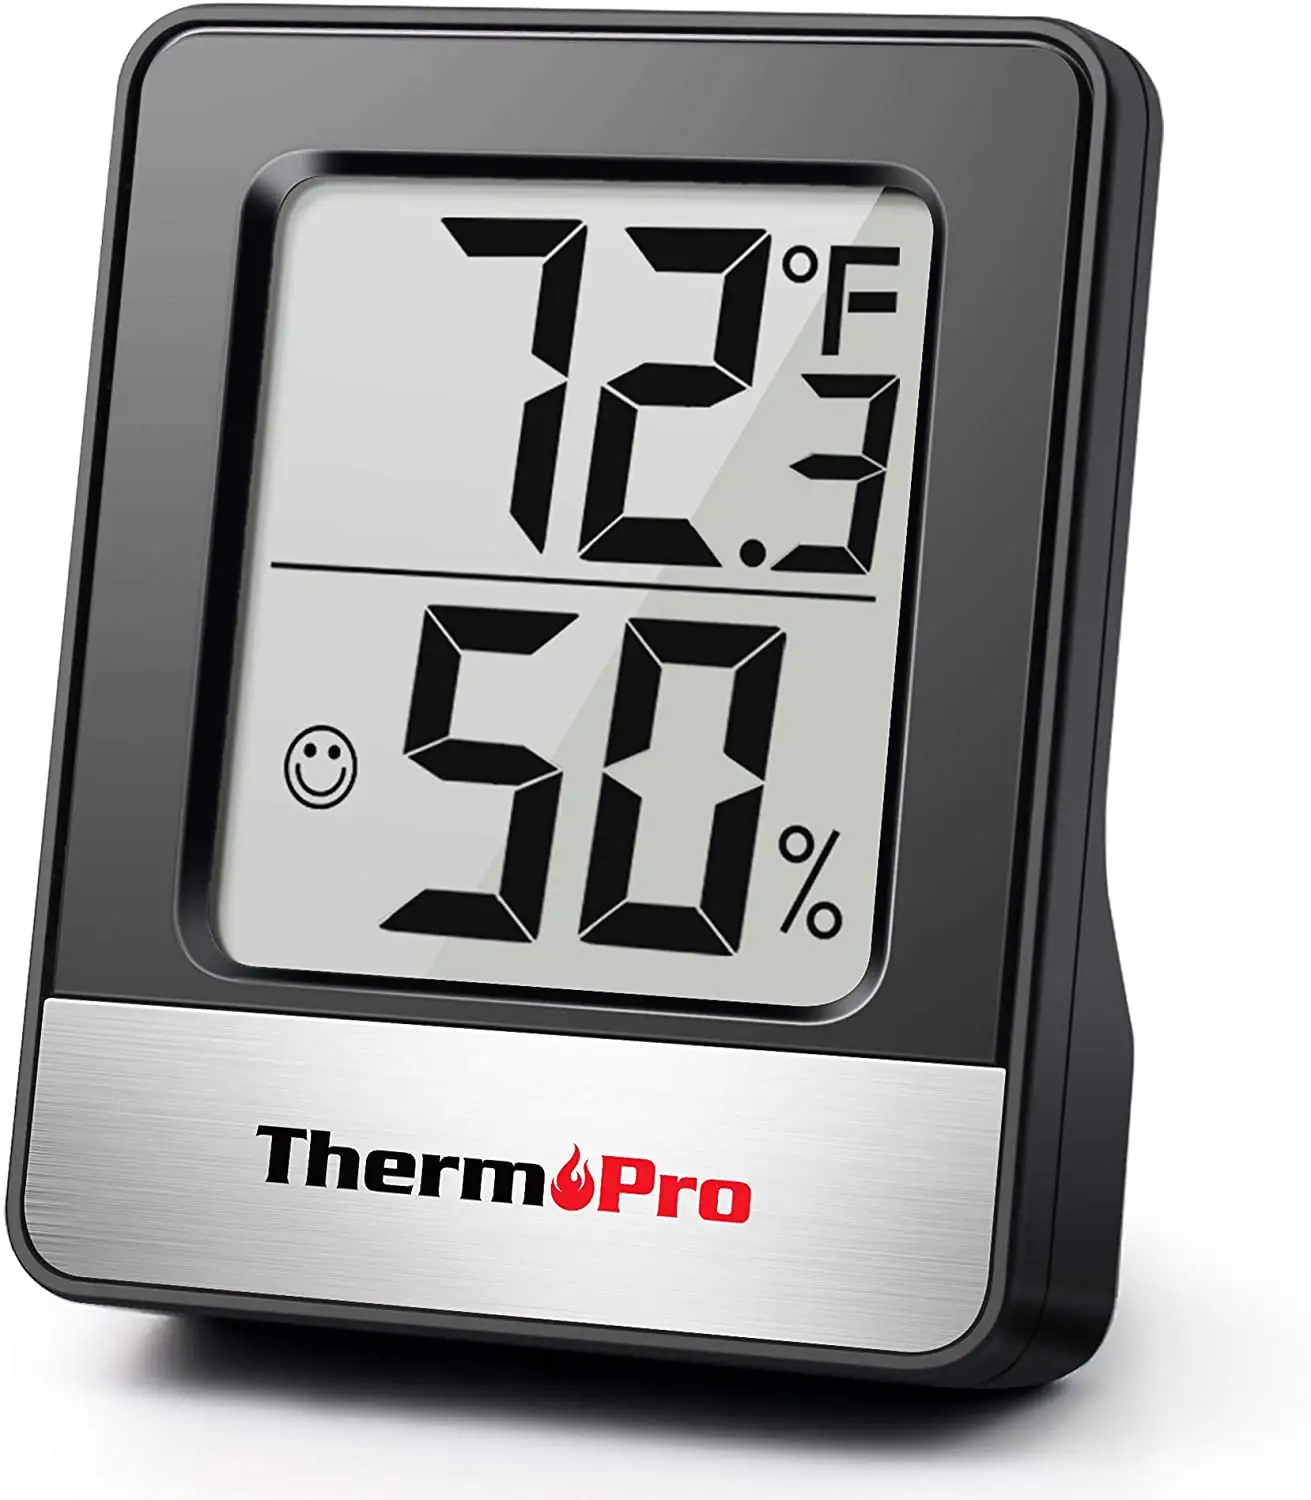 ThermoPro TP-67B Waterproof Weather Station Wireless Indoor Outdoor  Thermometer Digital Hygrometer Barometer with Cold-Resistant and Waterproof  Temperature Monitor, TP67B TP 67B, JG Superstore